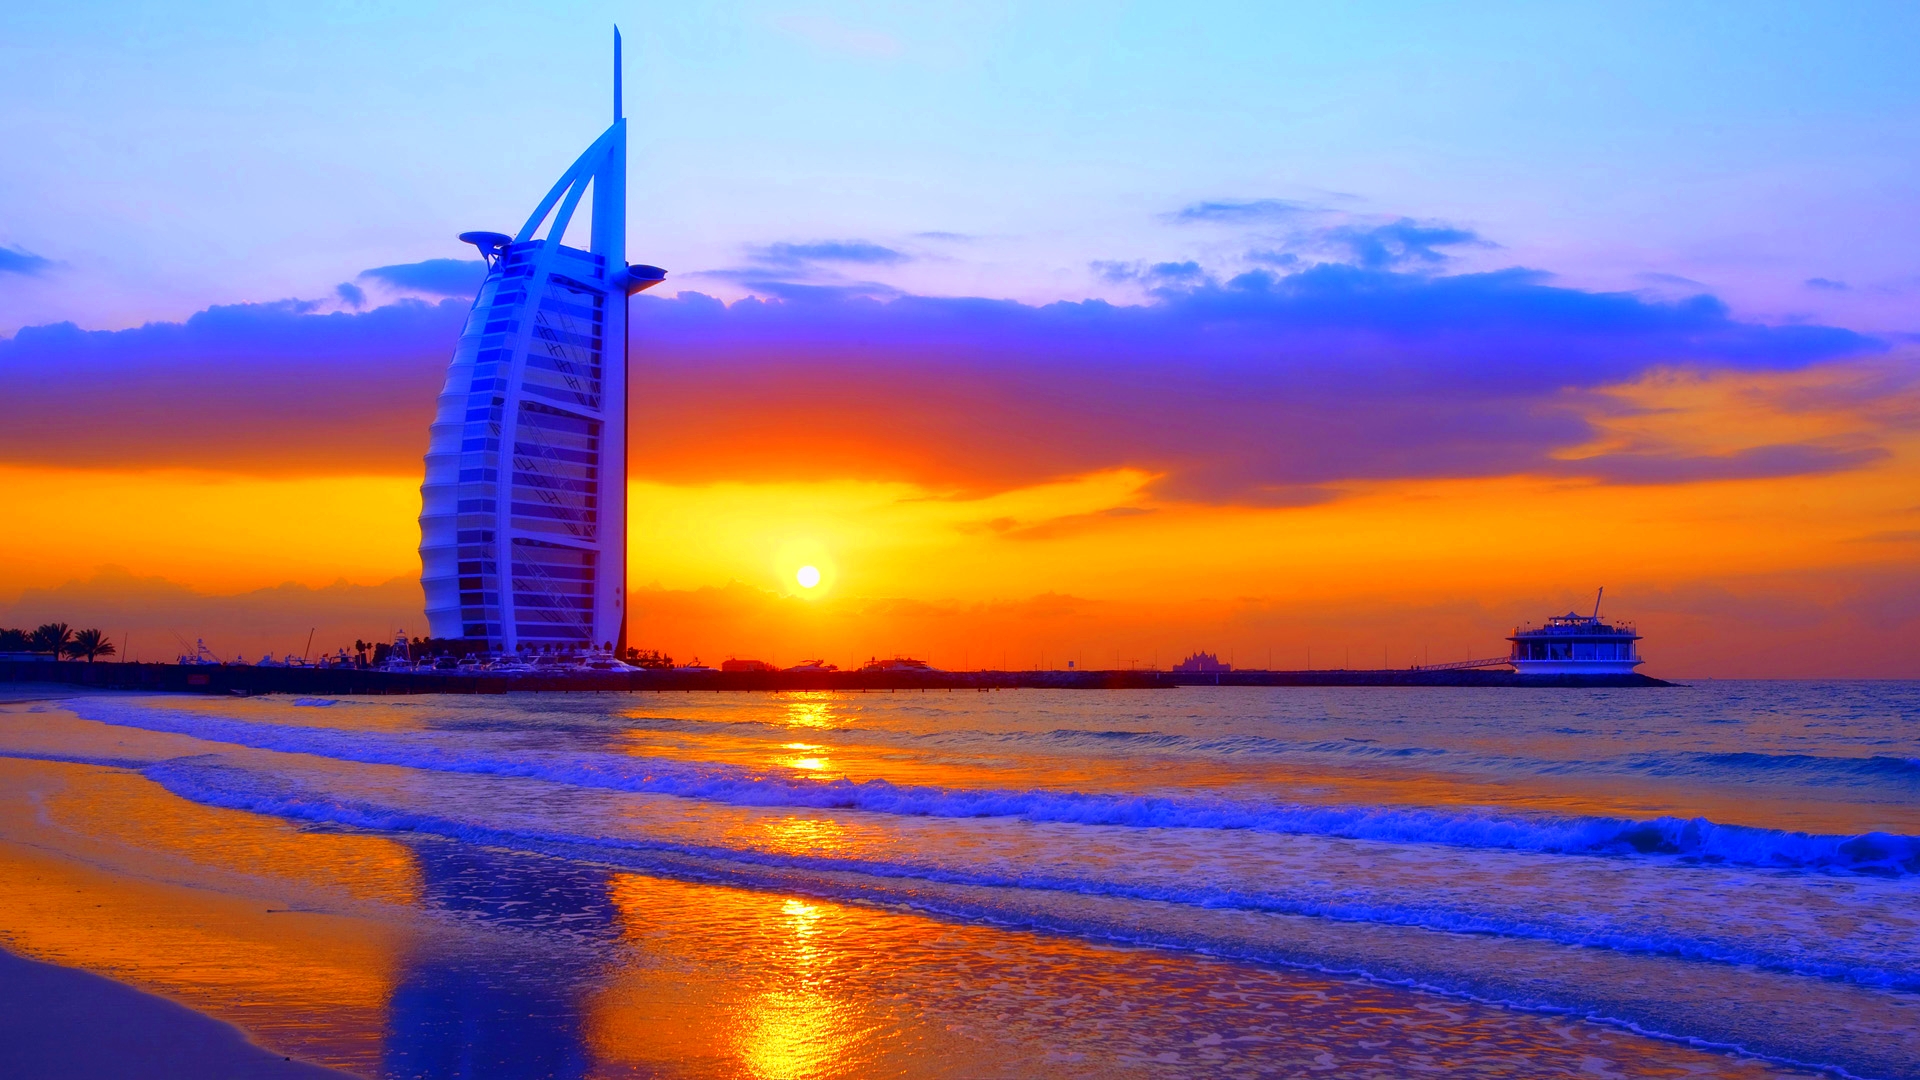 Winter 3 Star Dubai Holiday Travel & Tour Package